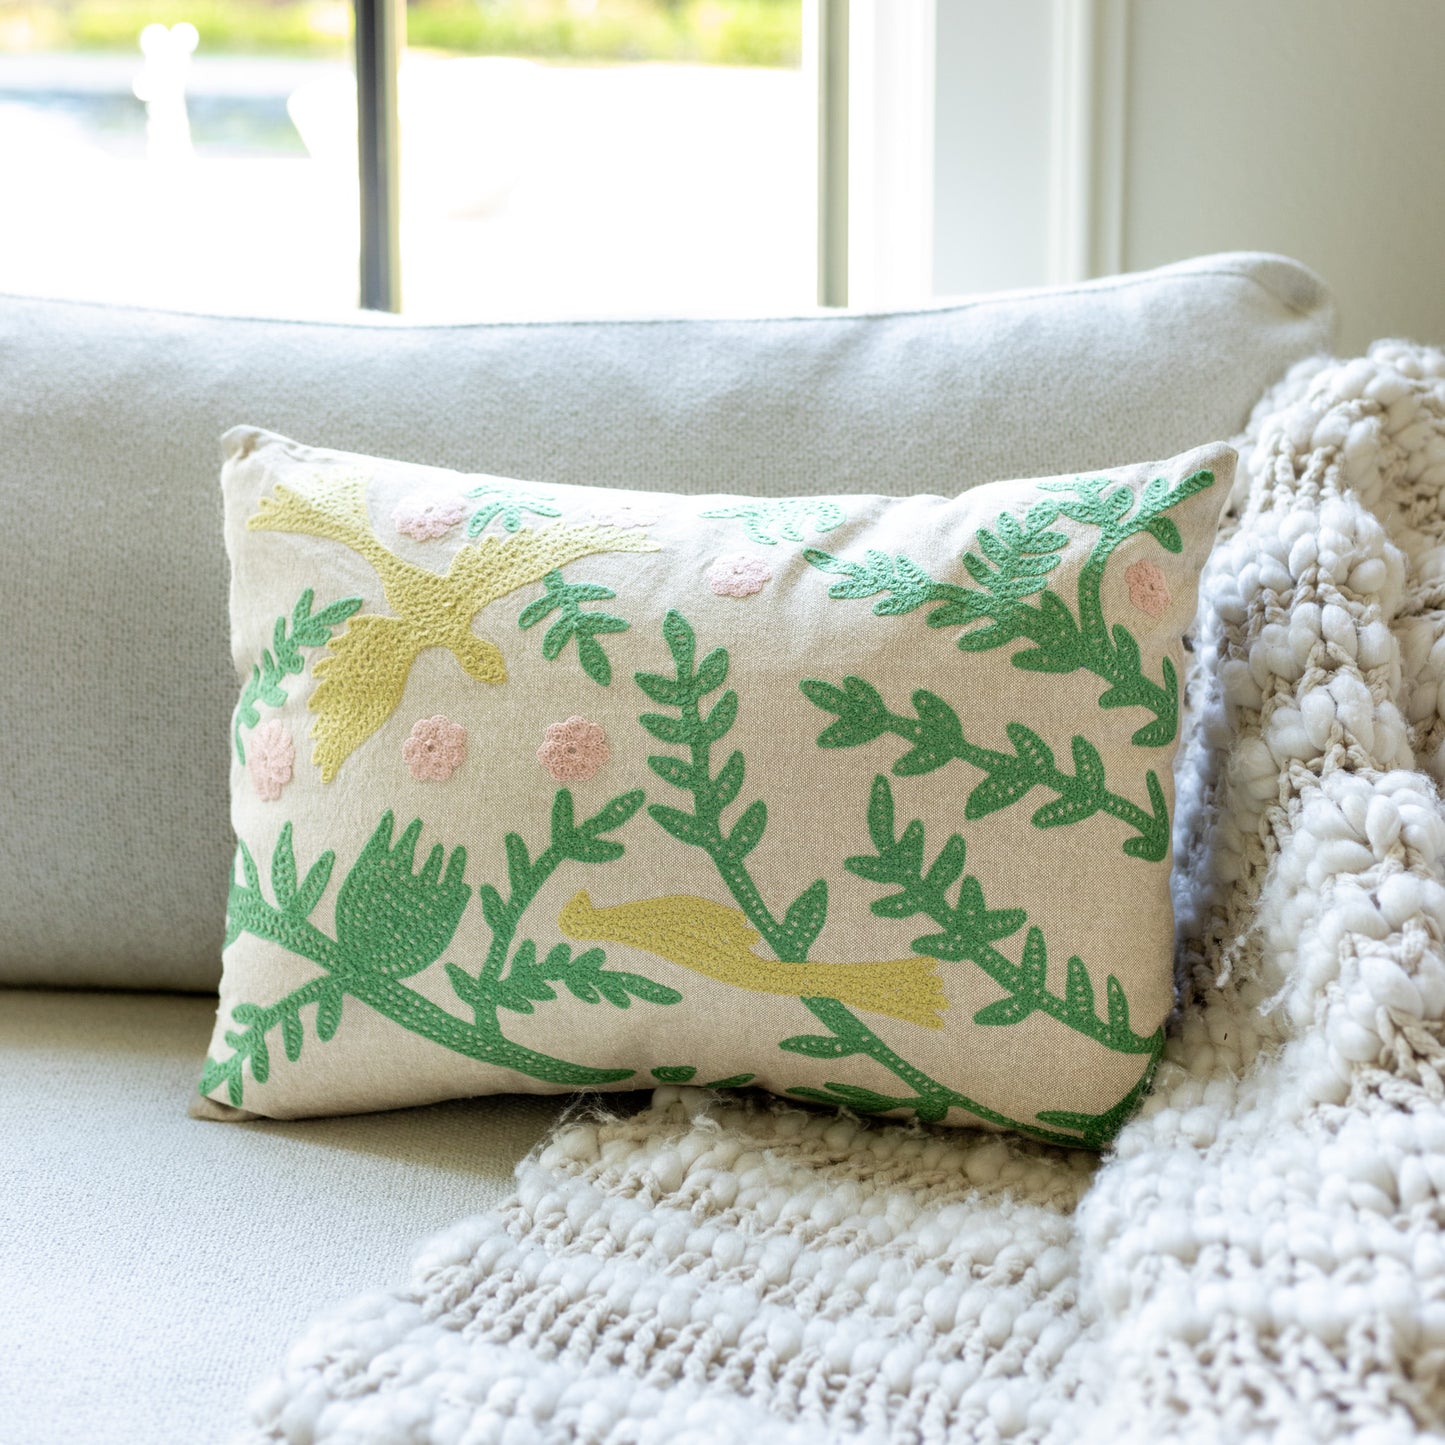 Chambray Lumbar Pillow with Bird Embroidery